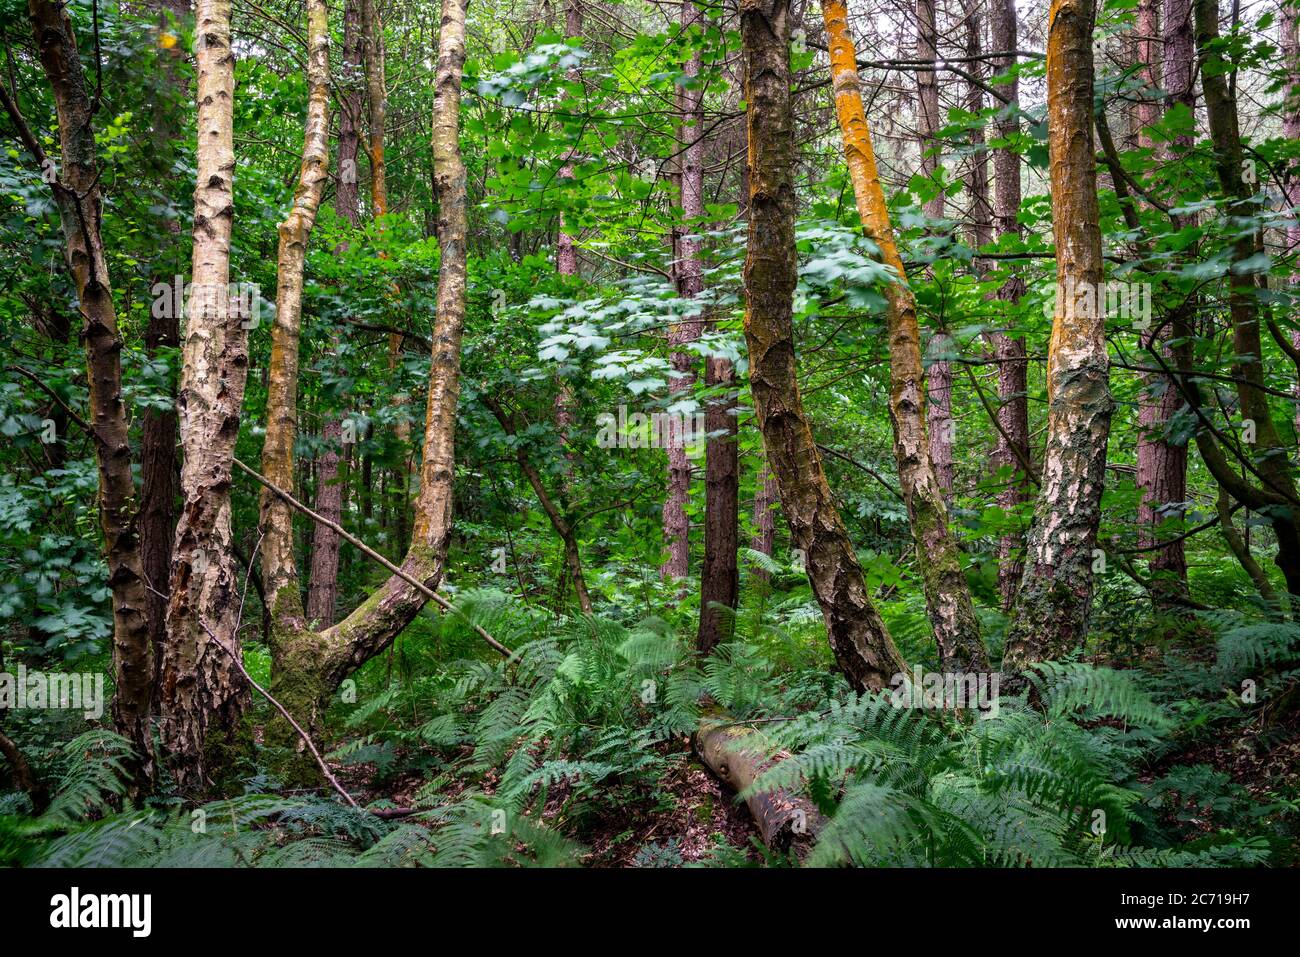 Birch and beech trees in summer woodland,Blidworth Woods,Nottinghamshire,England,UK Stock Photo